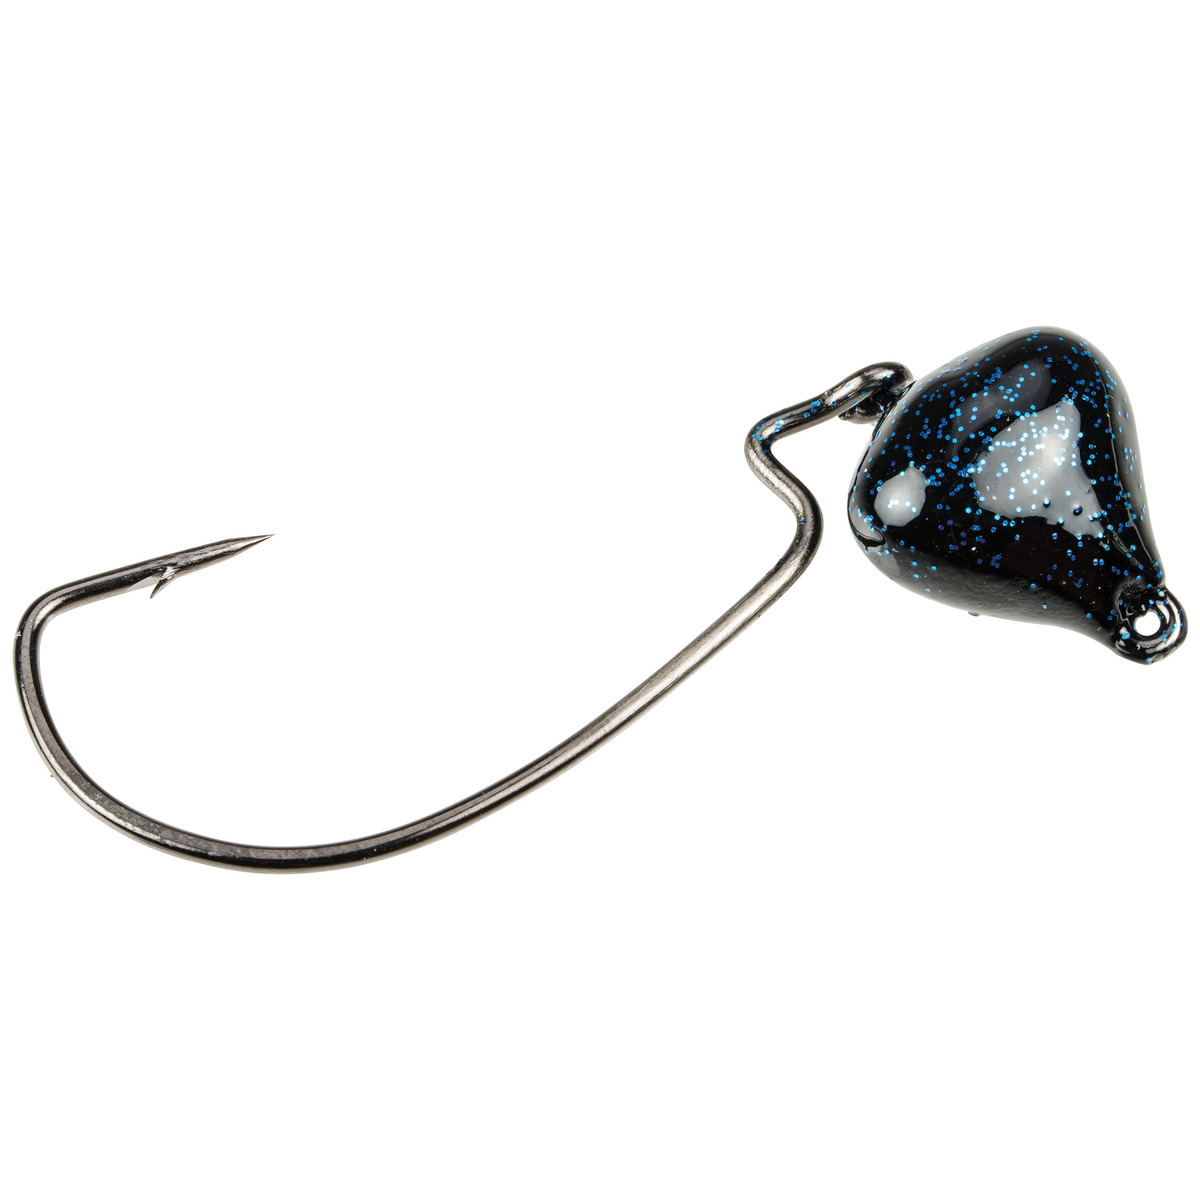 Strike King Md Jointed Structure Head - Black/Blue 14.2G